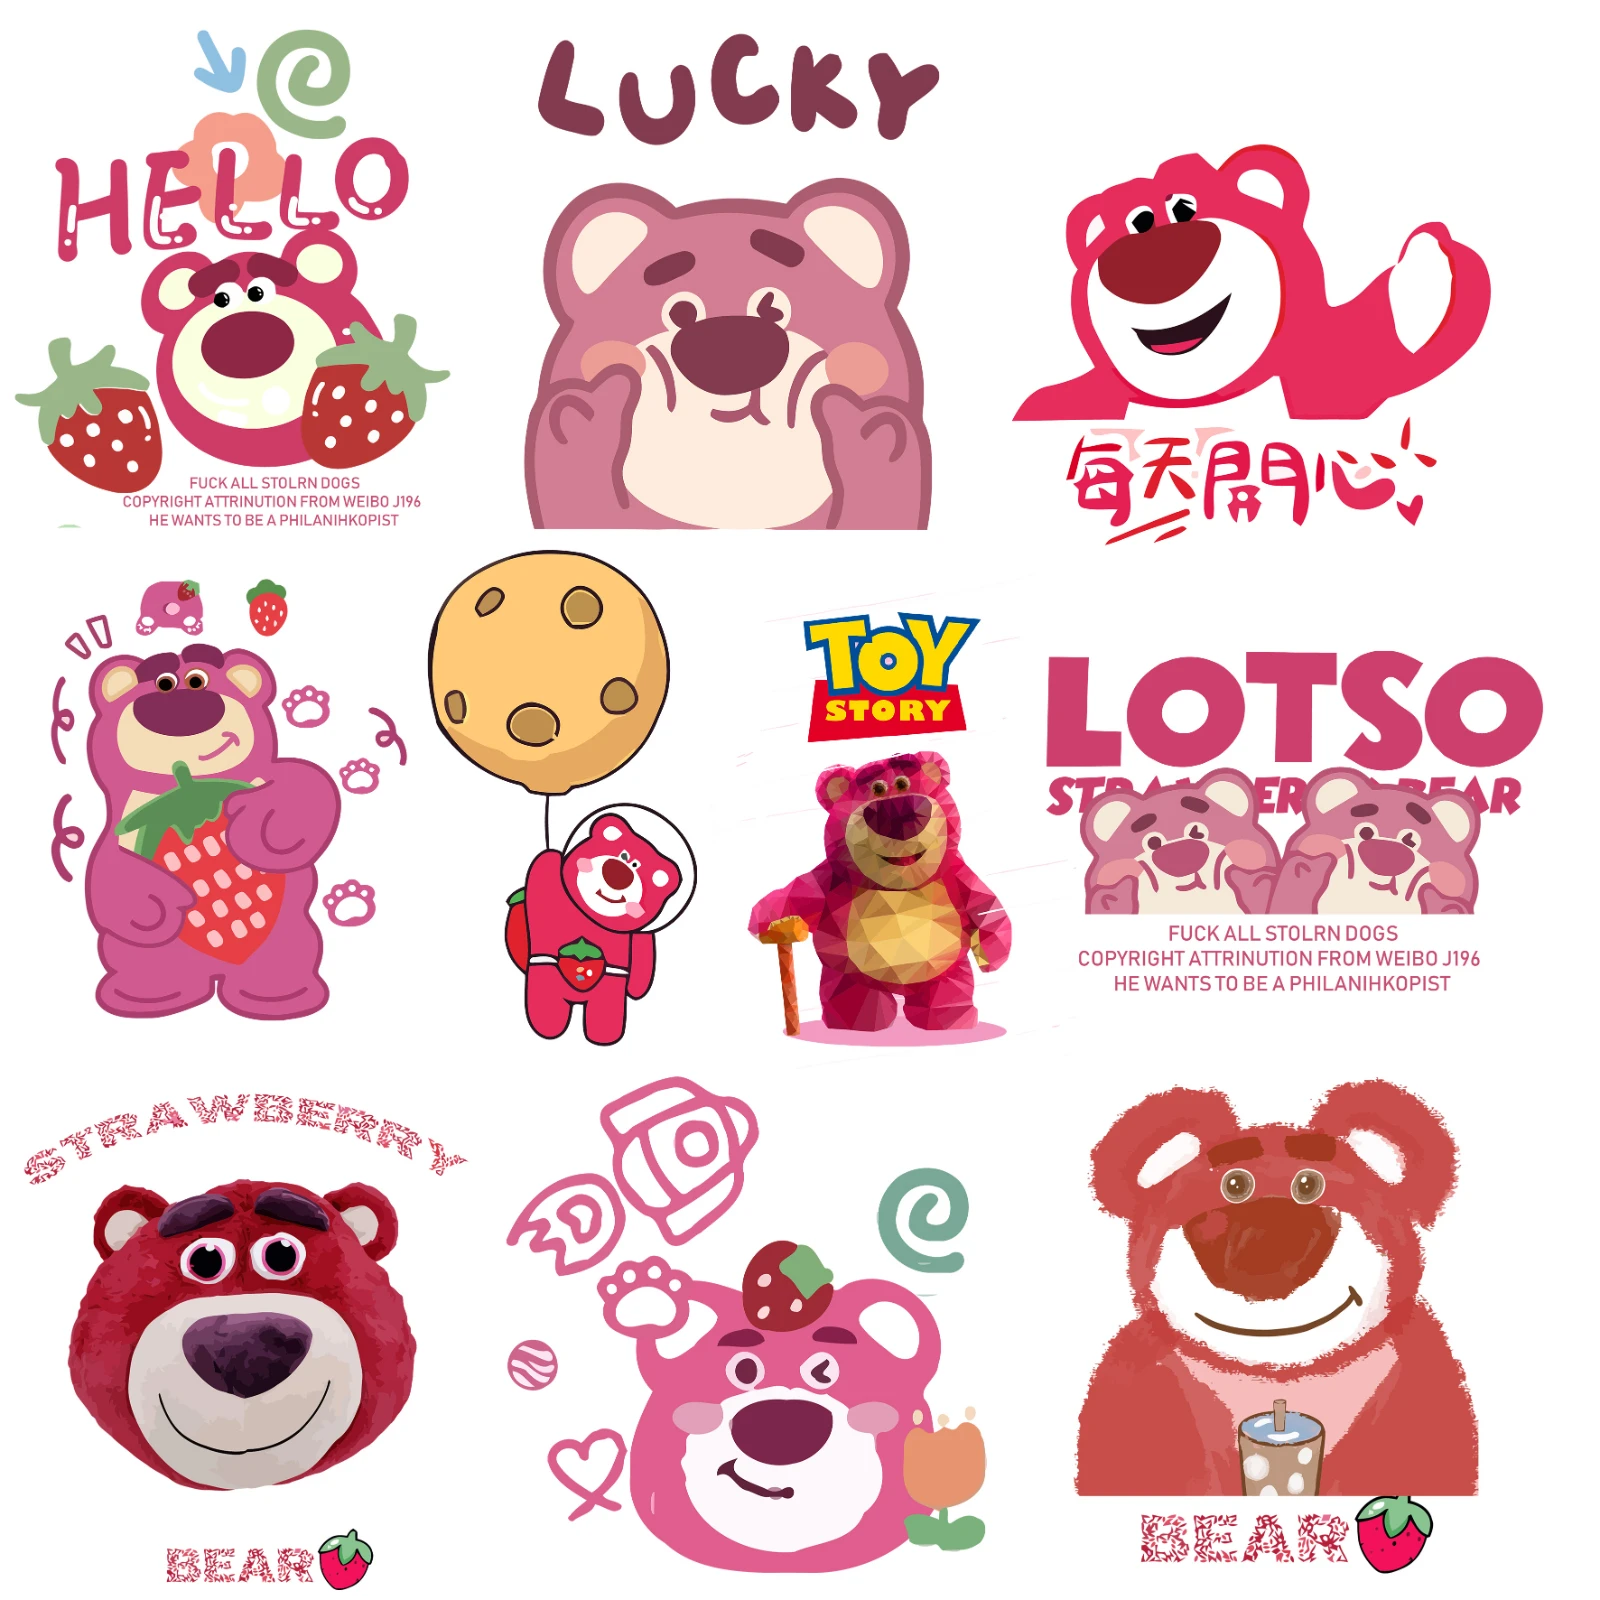 

Iron on Lots-o'-Huggin' Bear Stickers for Clothing DIY T-shirt Applique Toy Story3 Heat Transfer Vinyl Washable Stick on Clothes